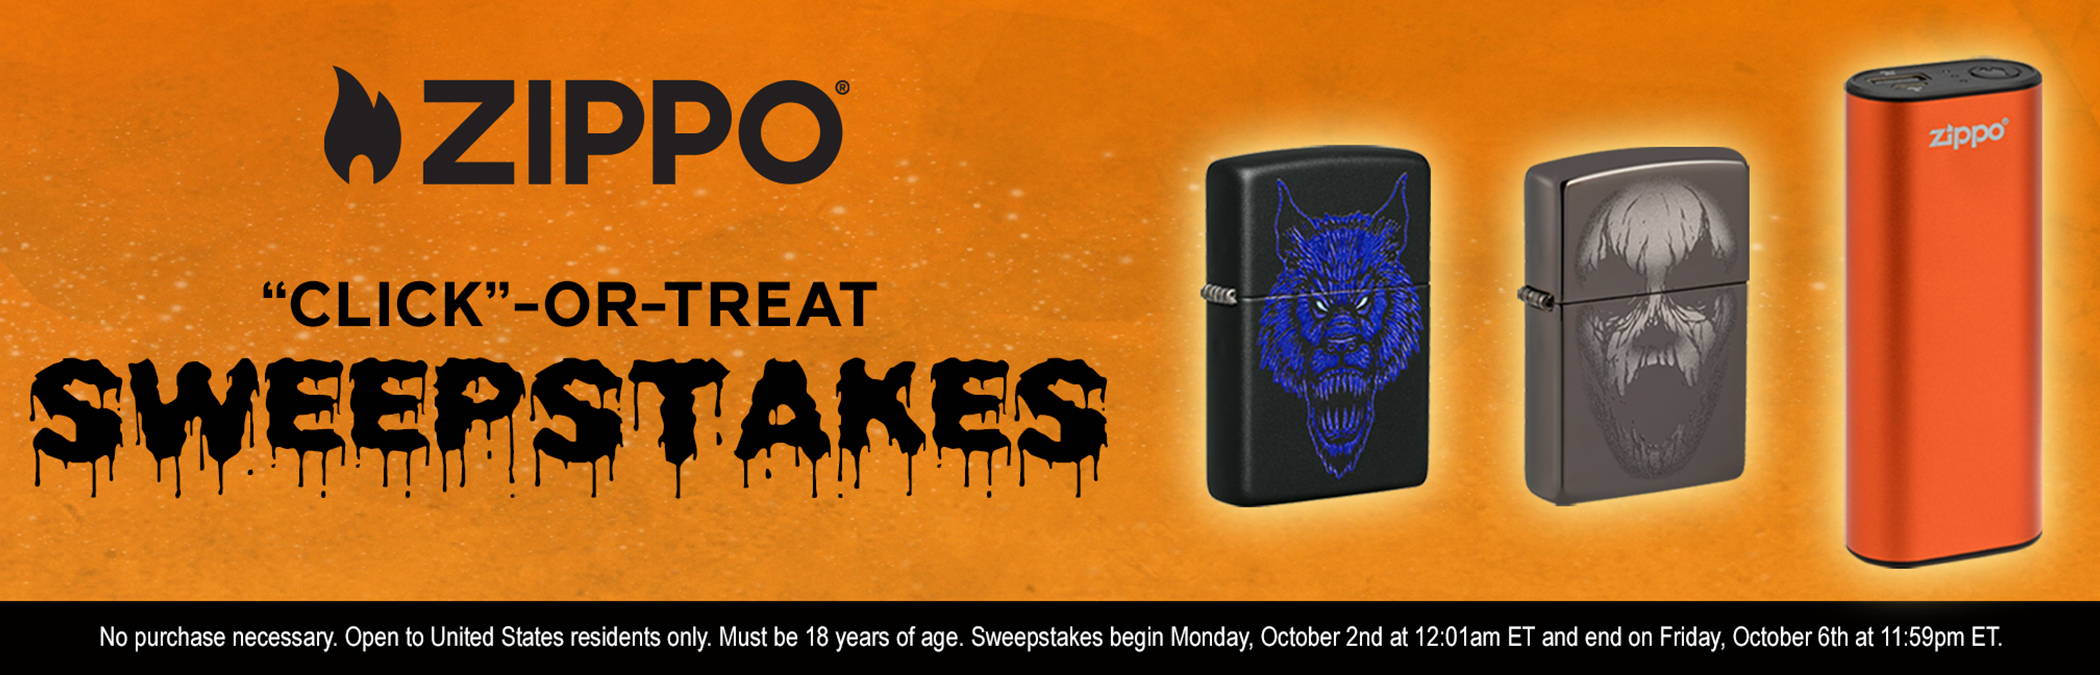 Zippo Click-Or-Treat Sweepstakes masthead with three prize items.